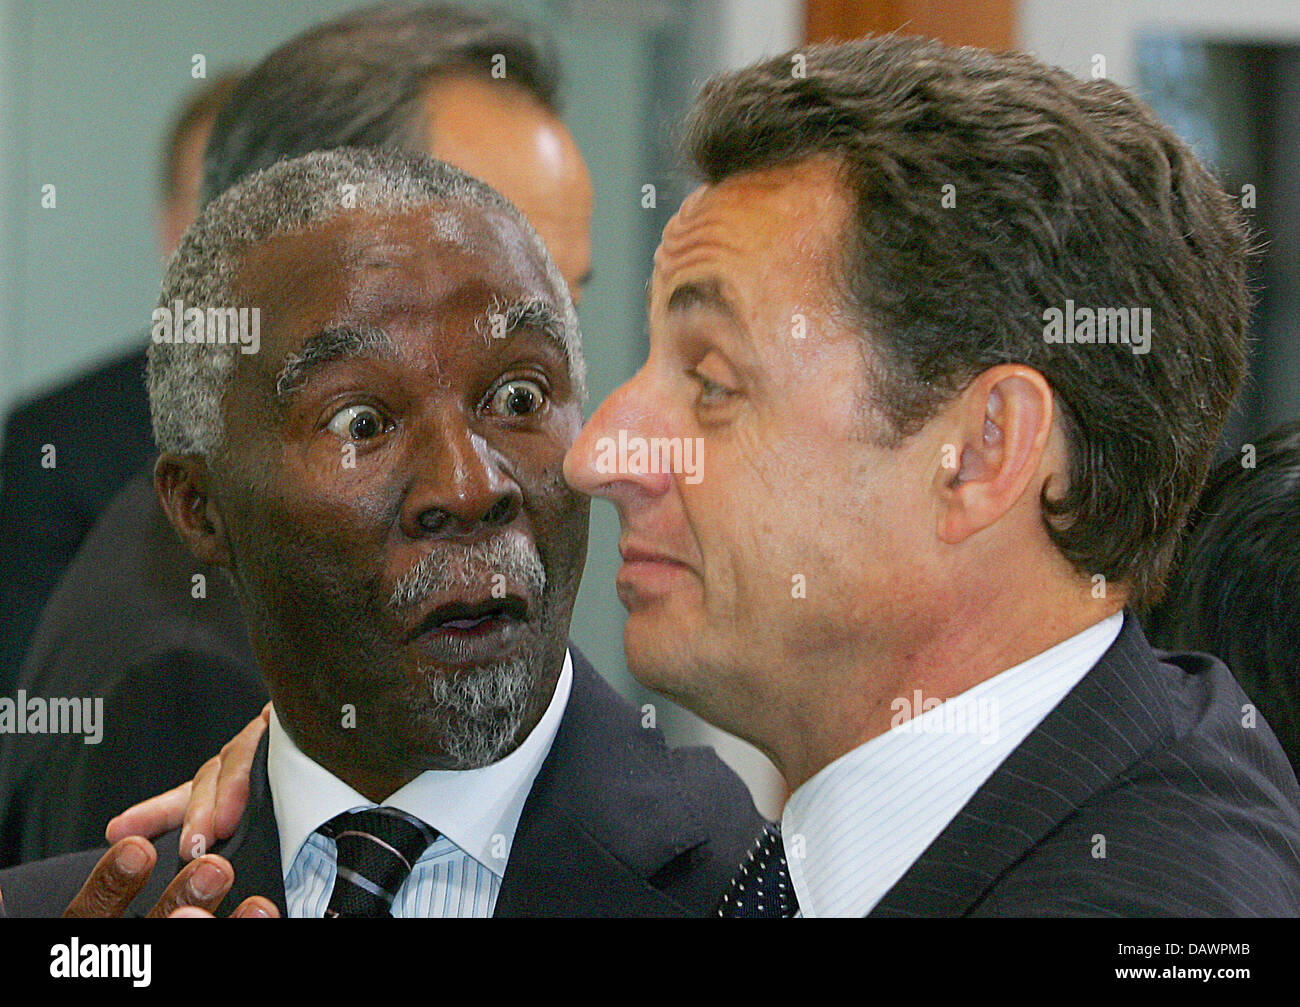 South African President Thabo Mbeki (L) looks surprised by French President Nicolas Sarkozy (R) at a session of the G8 with the so-called Outreach countries of Africa at the G8 Summit in Heiligendamm, Germany, 08 June 2007. The G8 states declared their will to increase monetary aid for Africa. Photo: Michael Urban Stock Photo